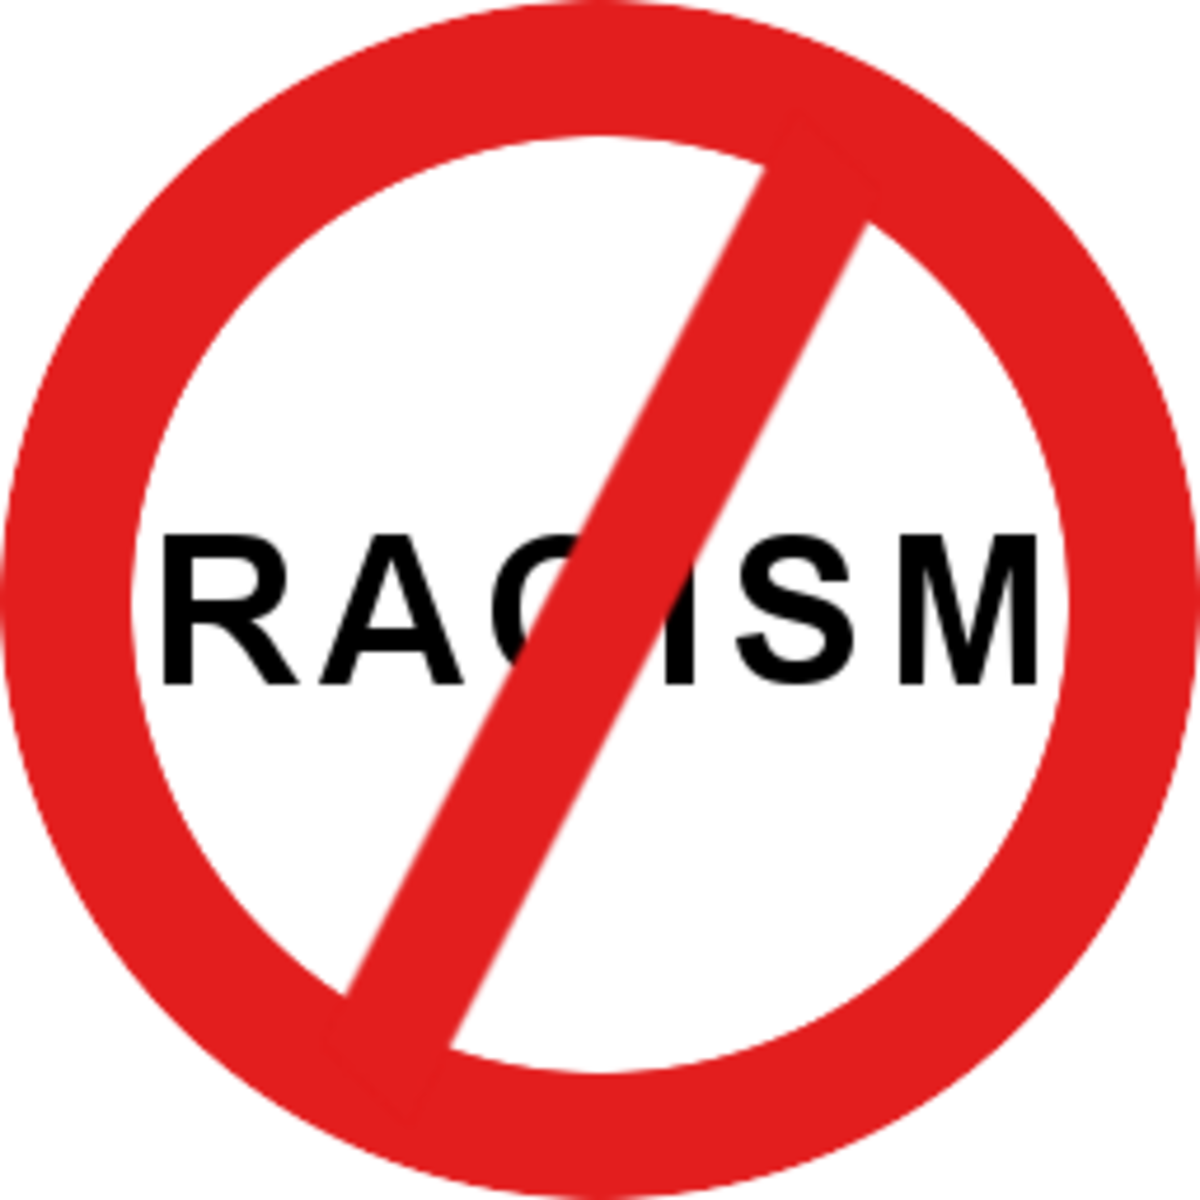 Racial Discrimination In America - One Woman's Perspective